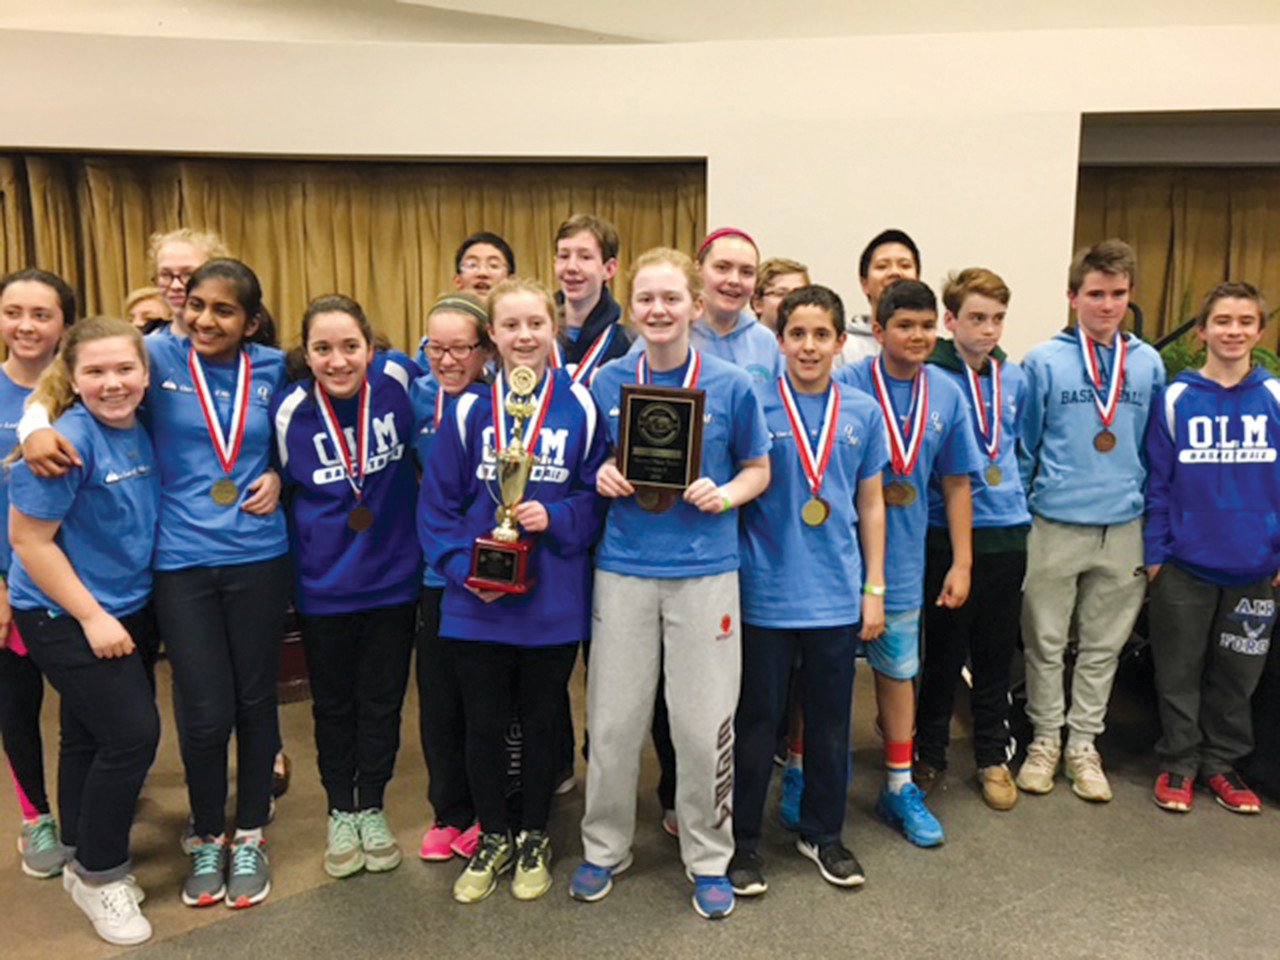 Members of OLM’s Science Olympiad team celebrate their second place trophy at the R.I. State Science Olympiad competition.